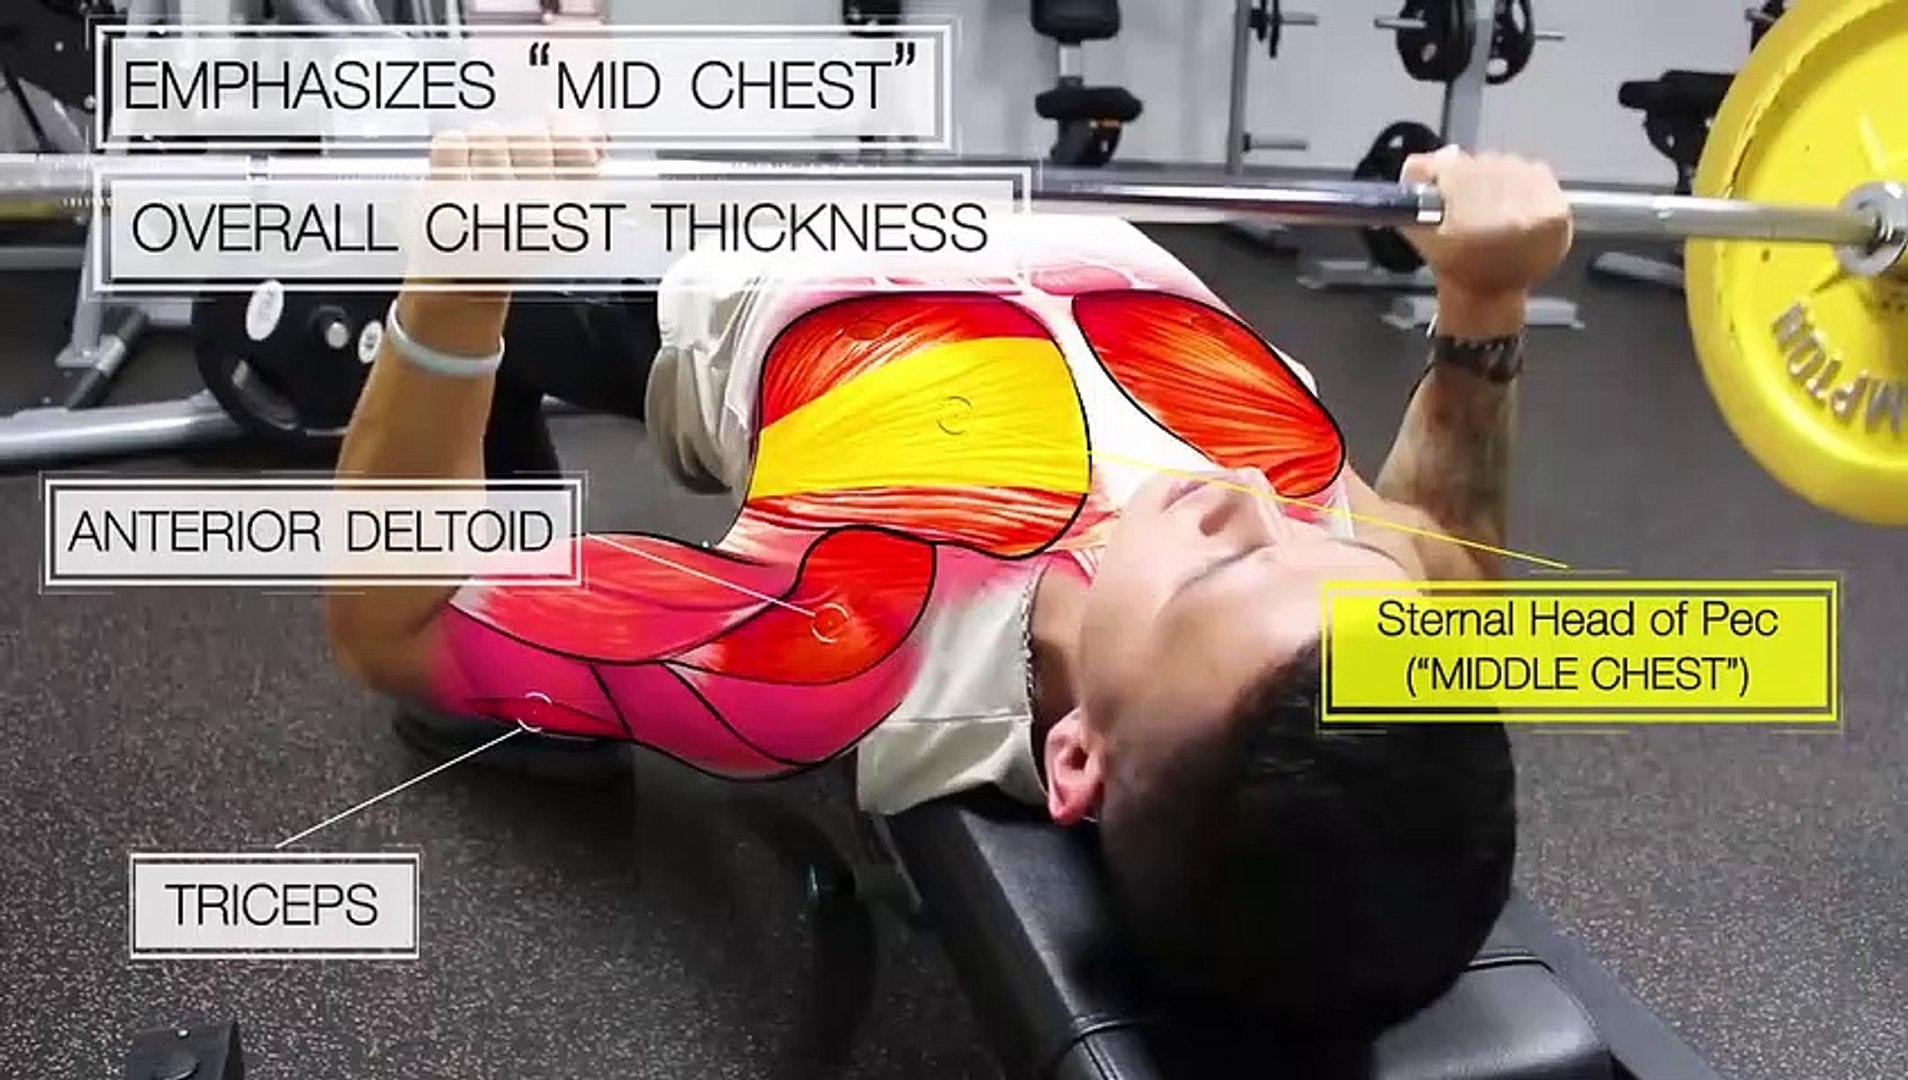 Chest Workout Home Version - video Dailymotion